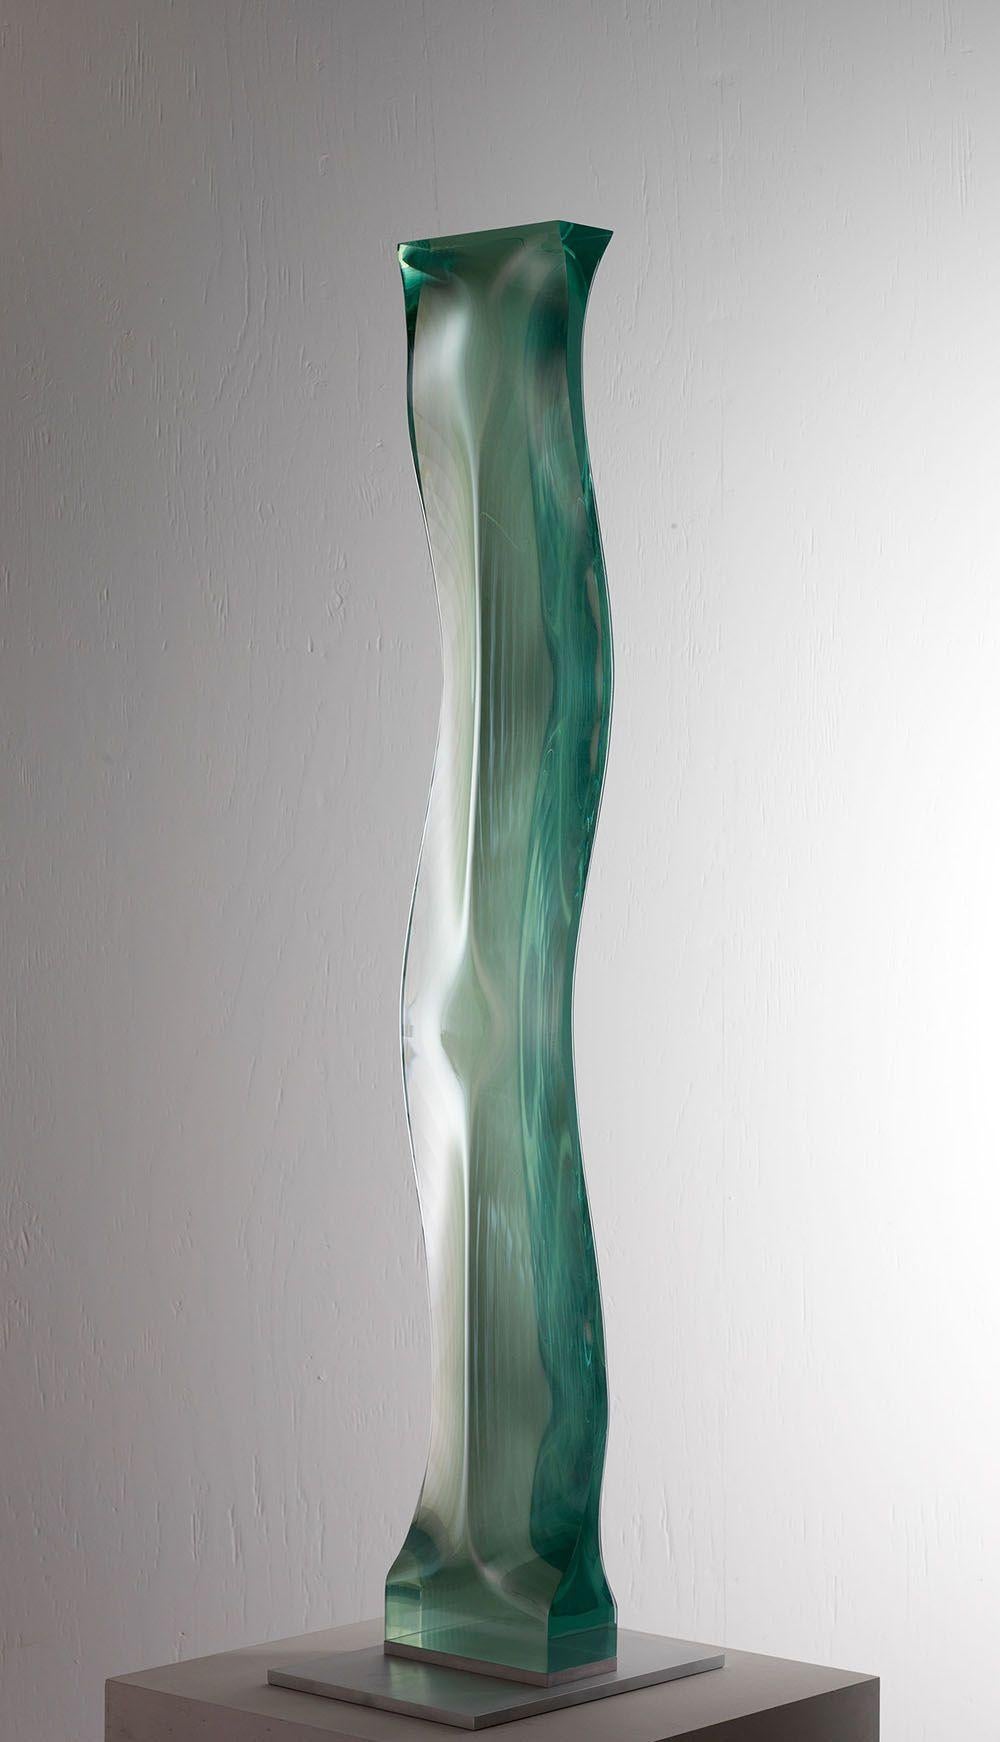 M.080601 is a glass sculpture by Japanese contemporary artist Toshio Iezumi, dimensions are 130 × 20 × 10 cm (51.2 × 7.9 × 3.9 in). 
The sculpture is signed and numbered, it is part of a limited edition of 3 editions and comes with a certificate of